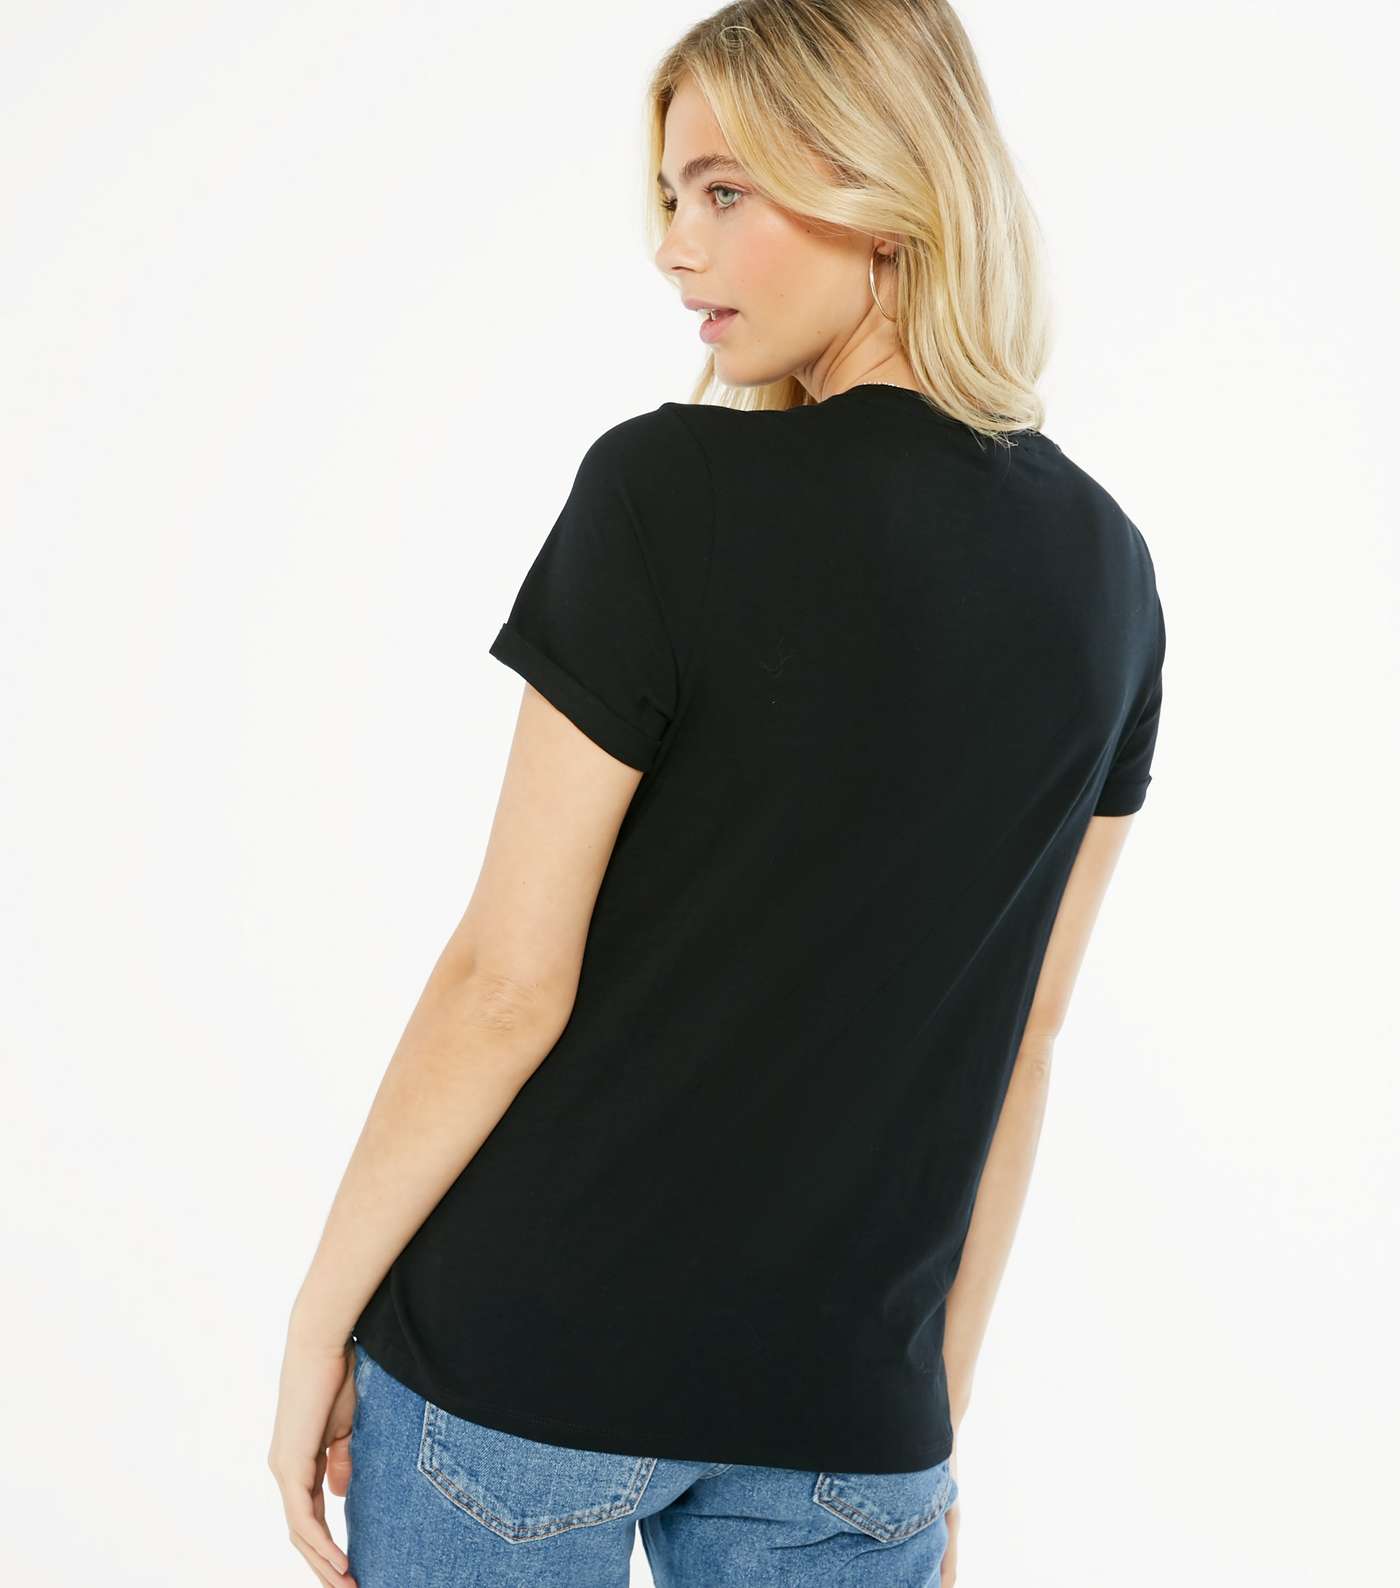 Maternity 2 Pack Black and White Crew T-Shirts Image 3